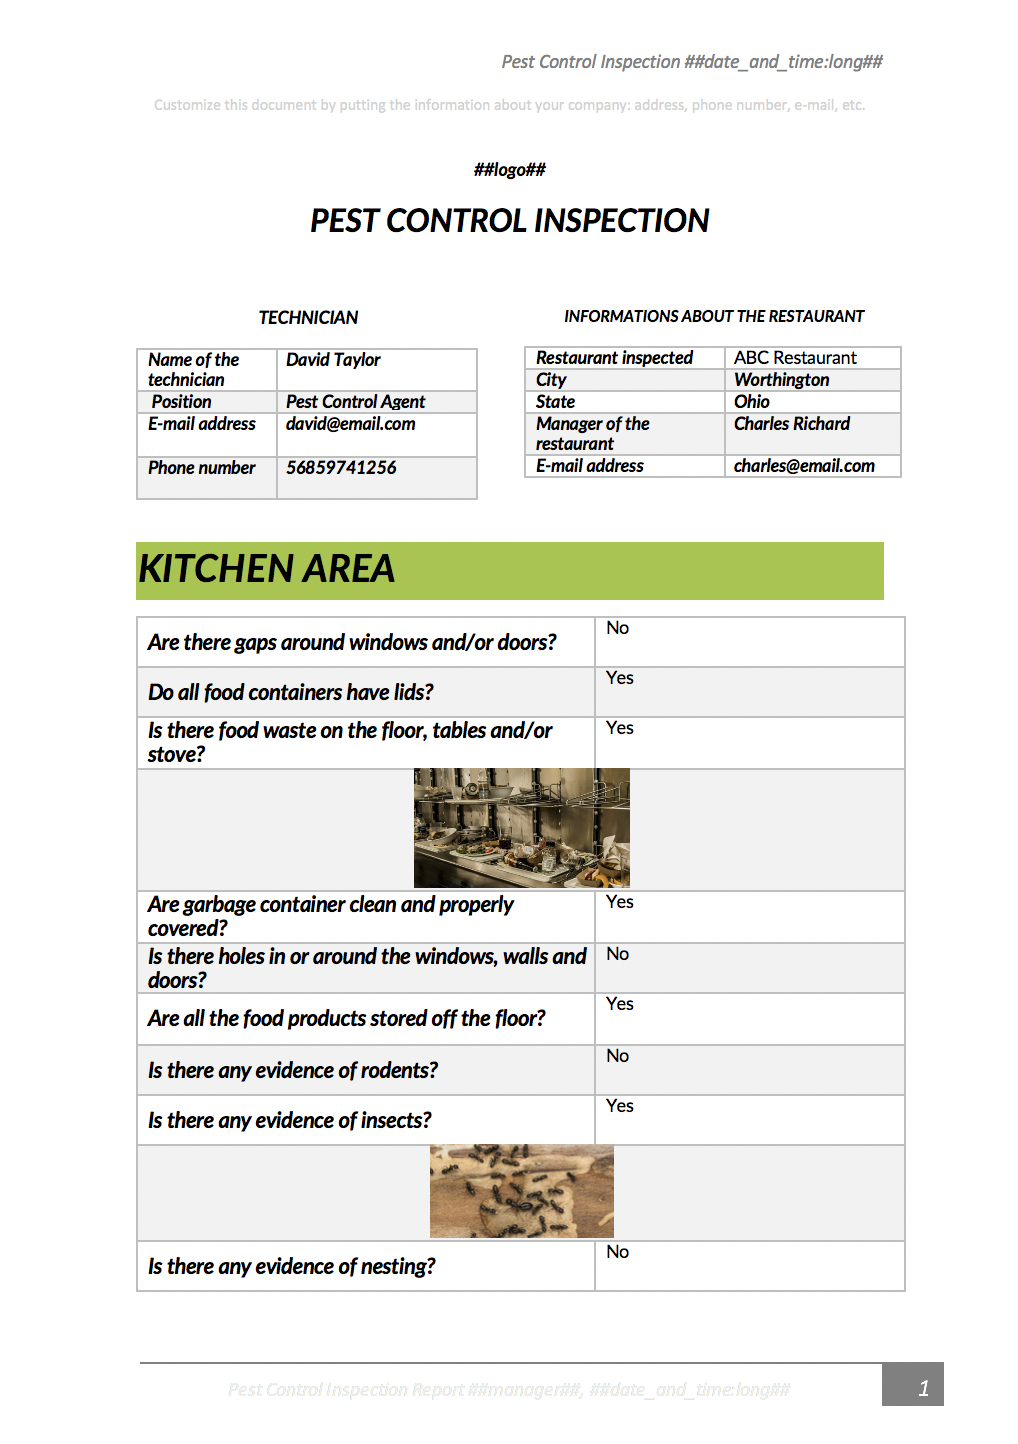 Pest Control Inspection With Kizeo Forms From Your Cellphone Intended For Pest Control Inspection Report Template